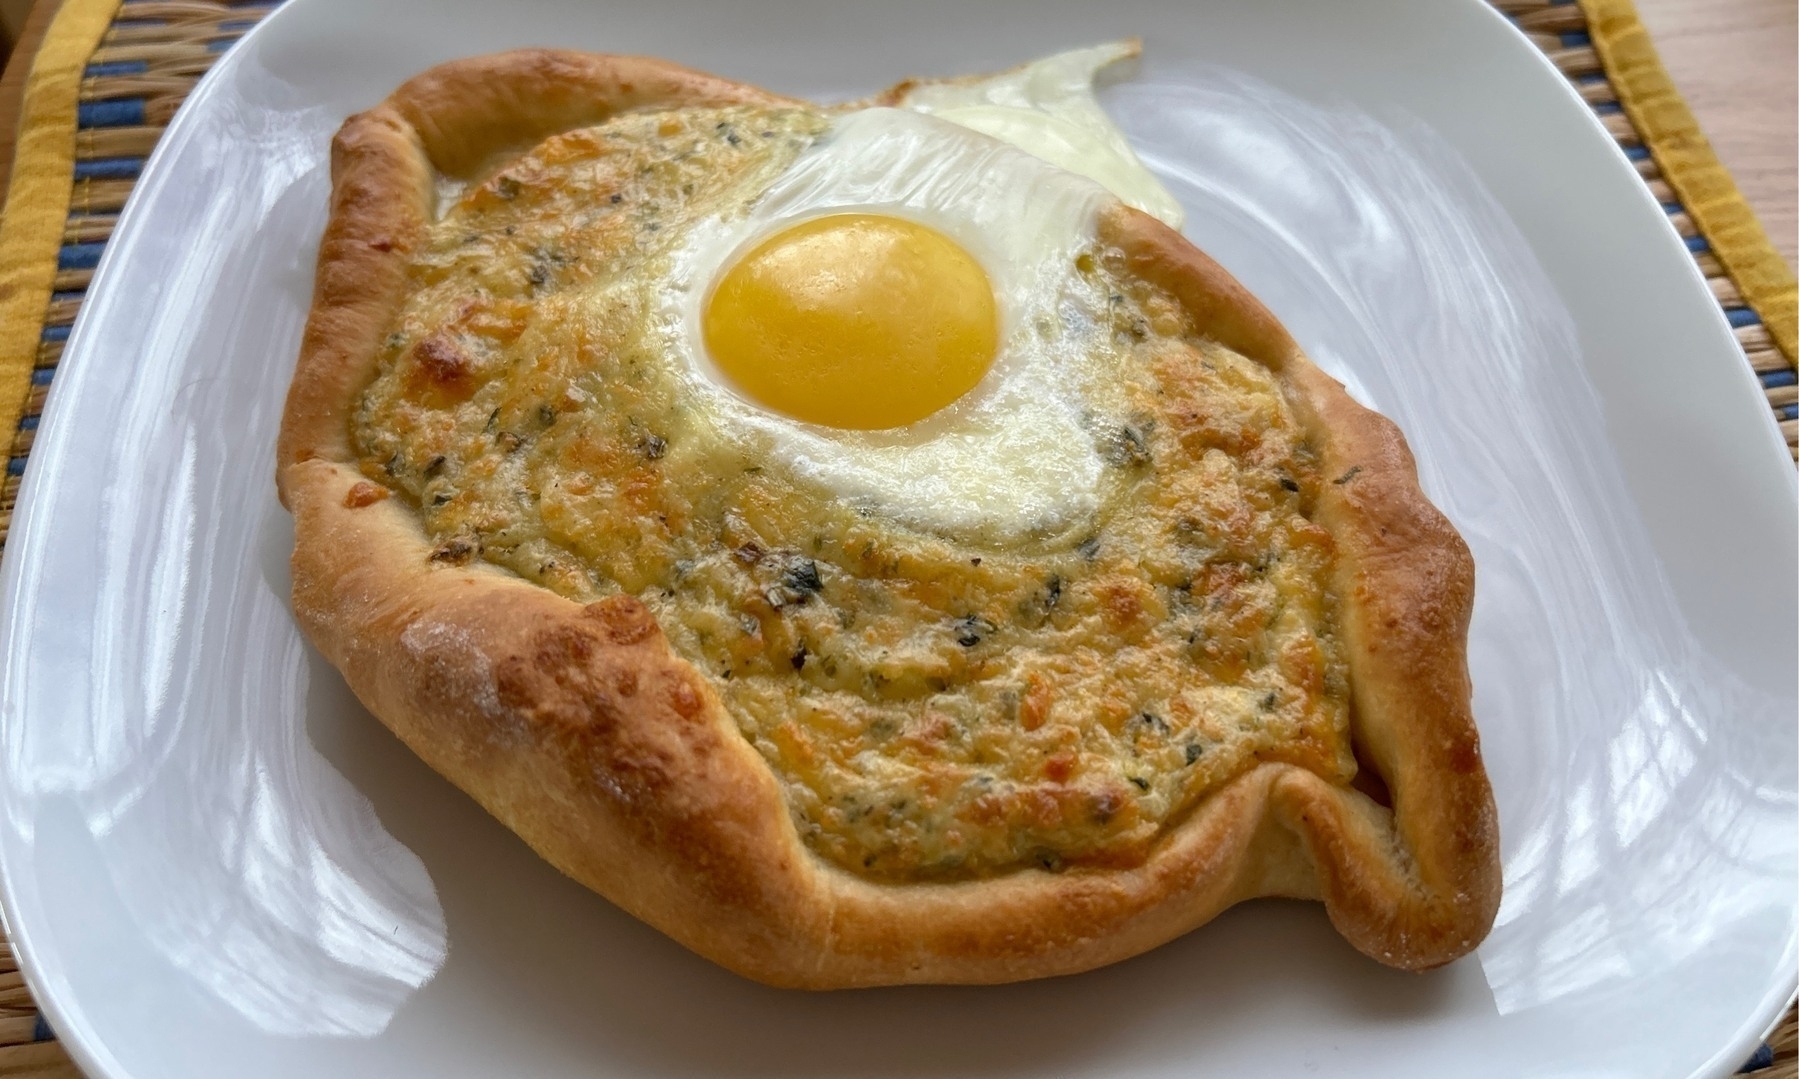 Oval bread base with a cheese filling and egg on top with everything resting on a square white plate. 